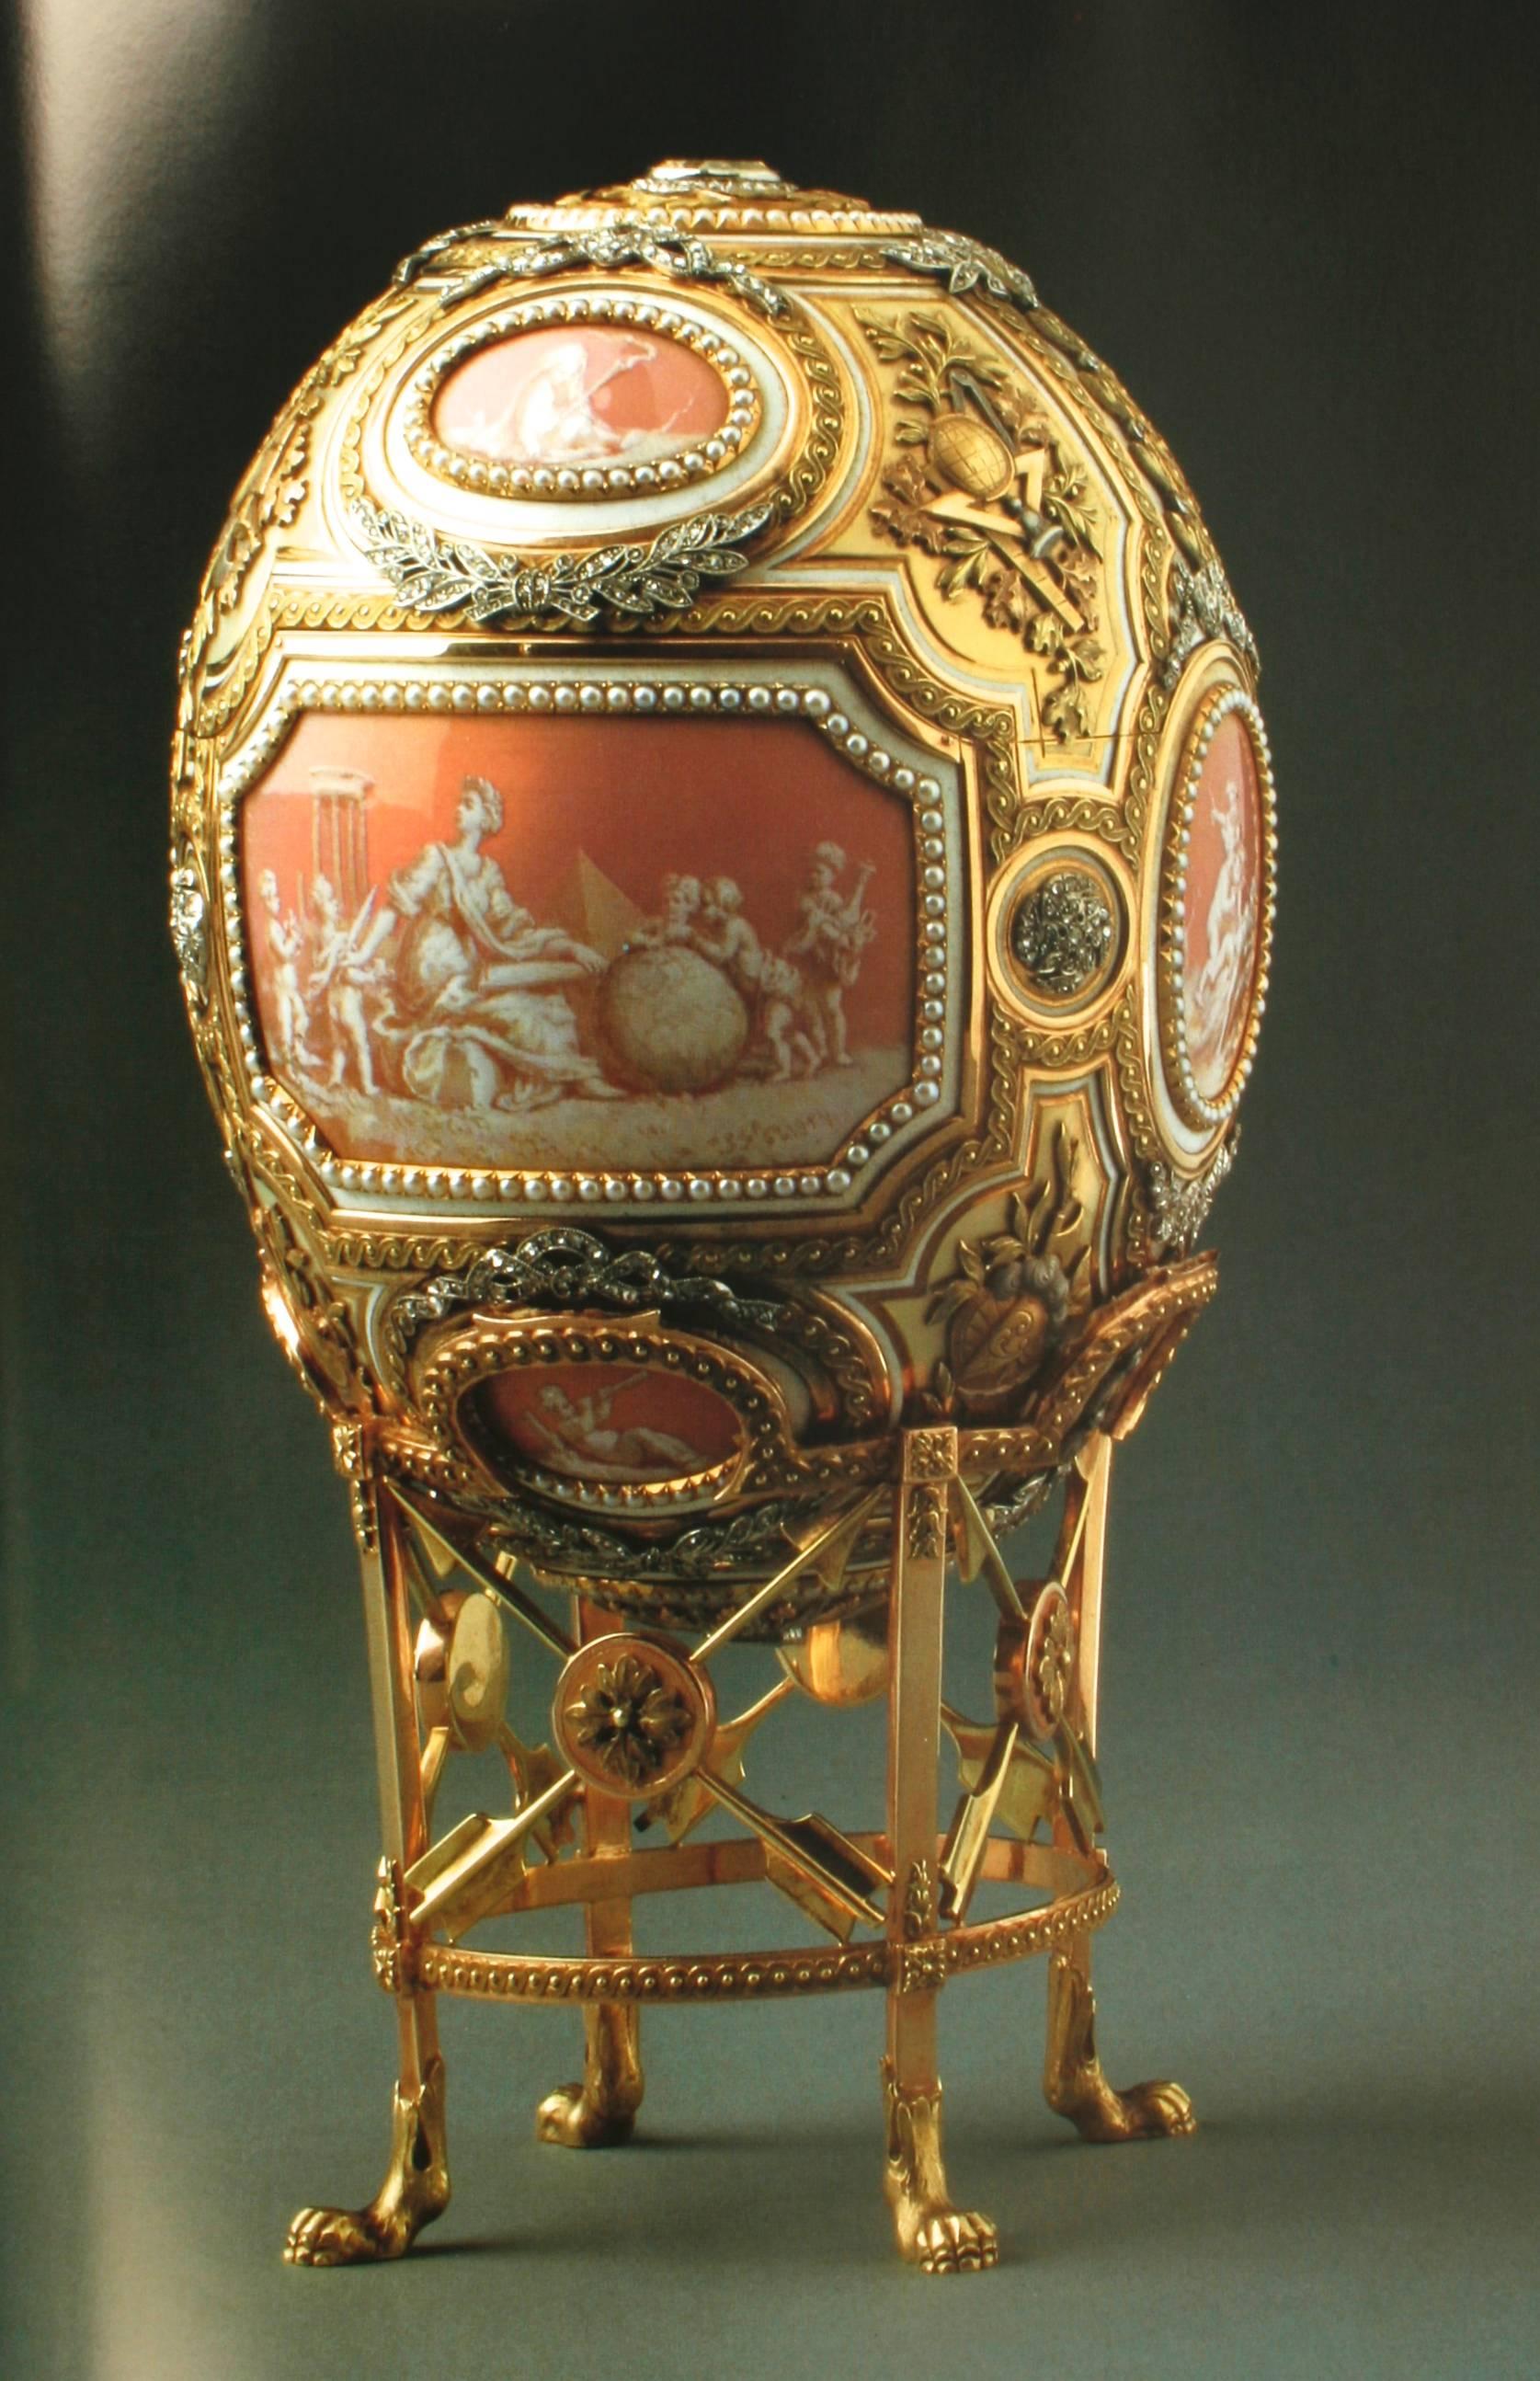 Fabergé and The Russian Master Goldsmiths by Gerard Hill 1